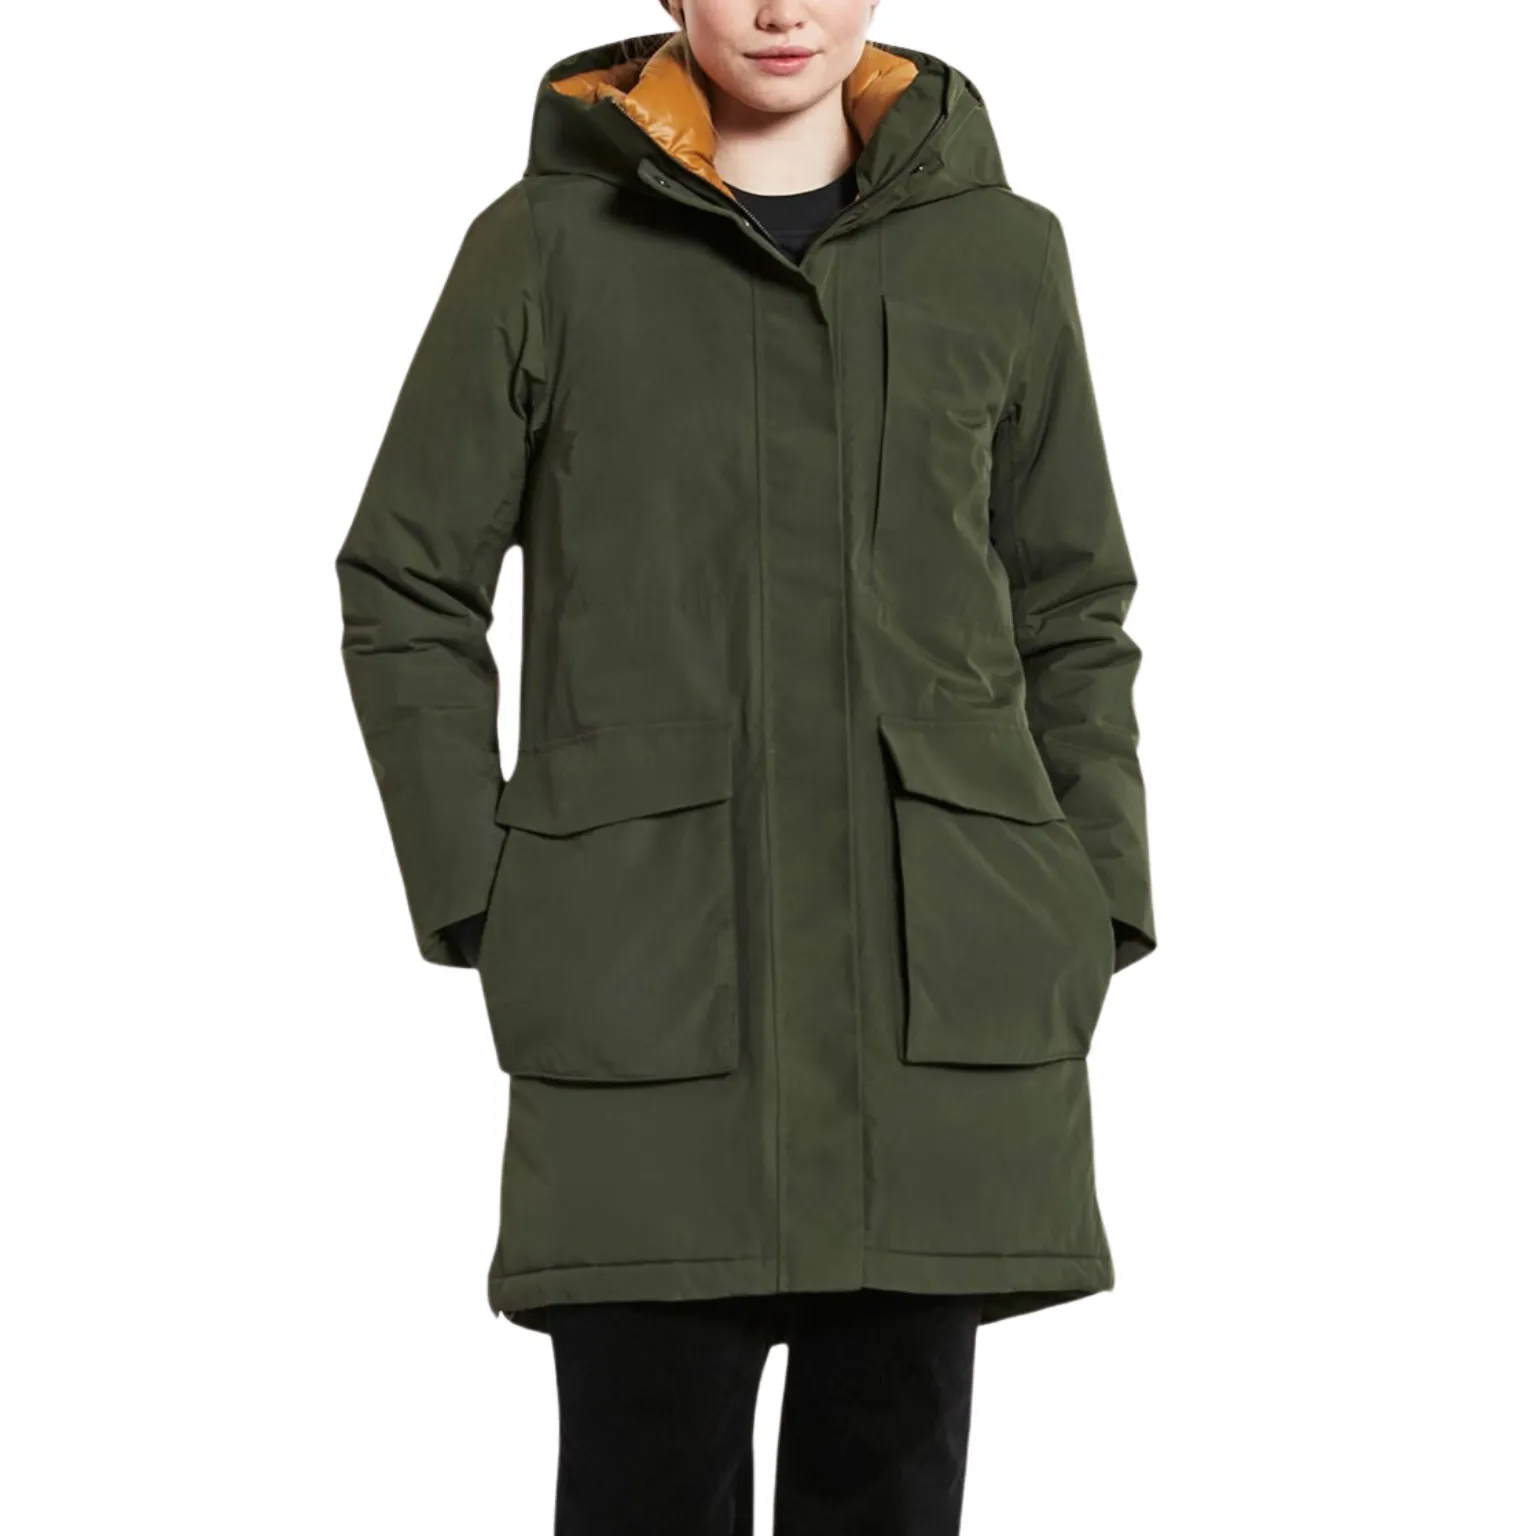 Parka Jacket Manufacturing with superior quality